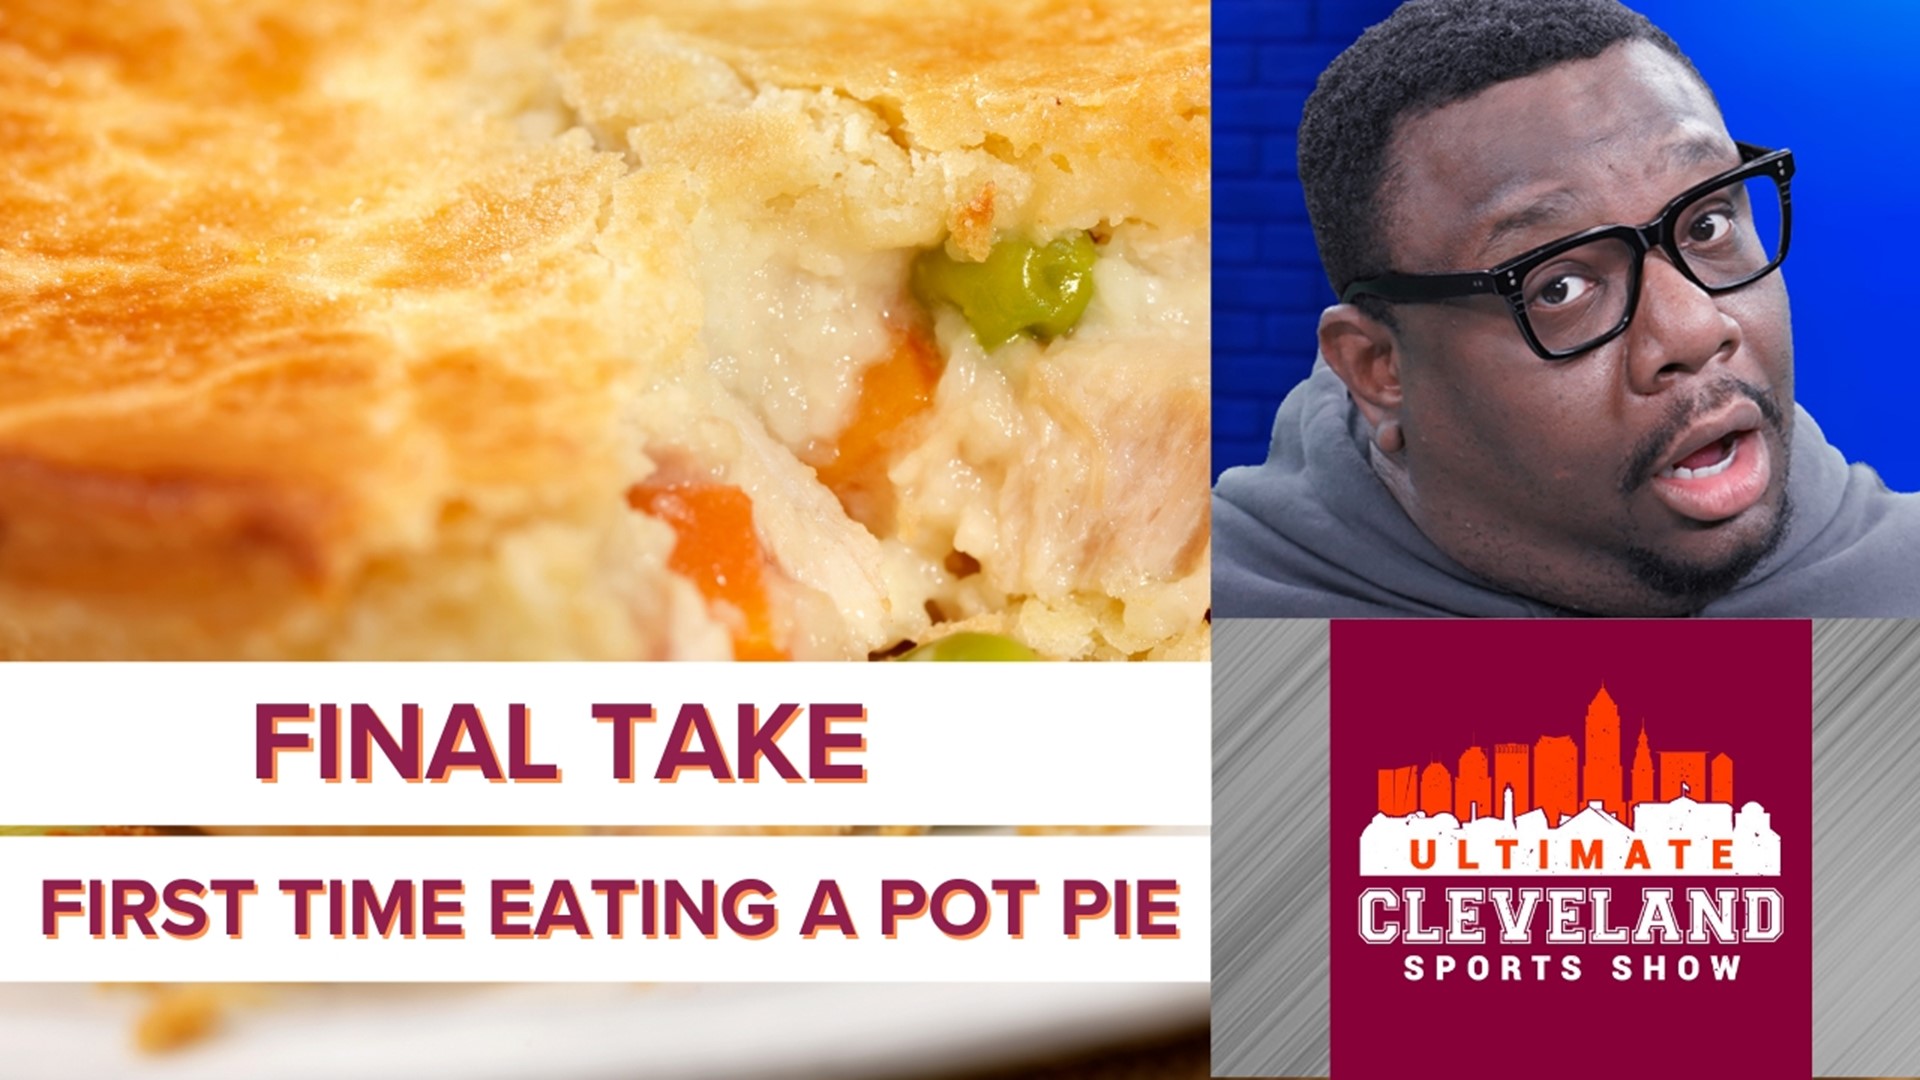 G-Bush shares his experience eating a pot pie as an adult and reminisces on his childhood foods.